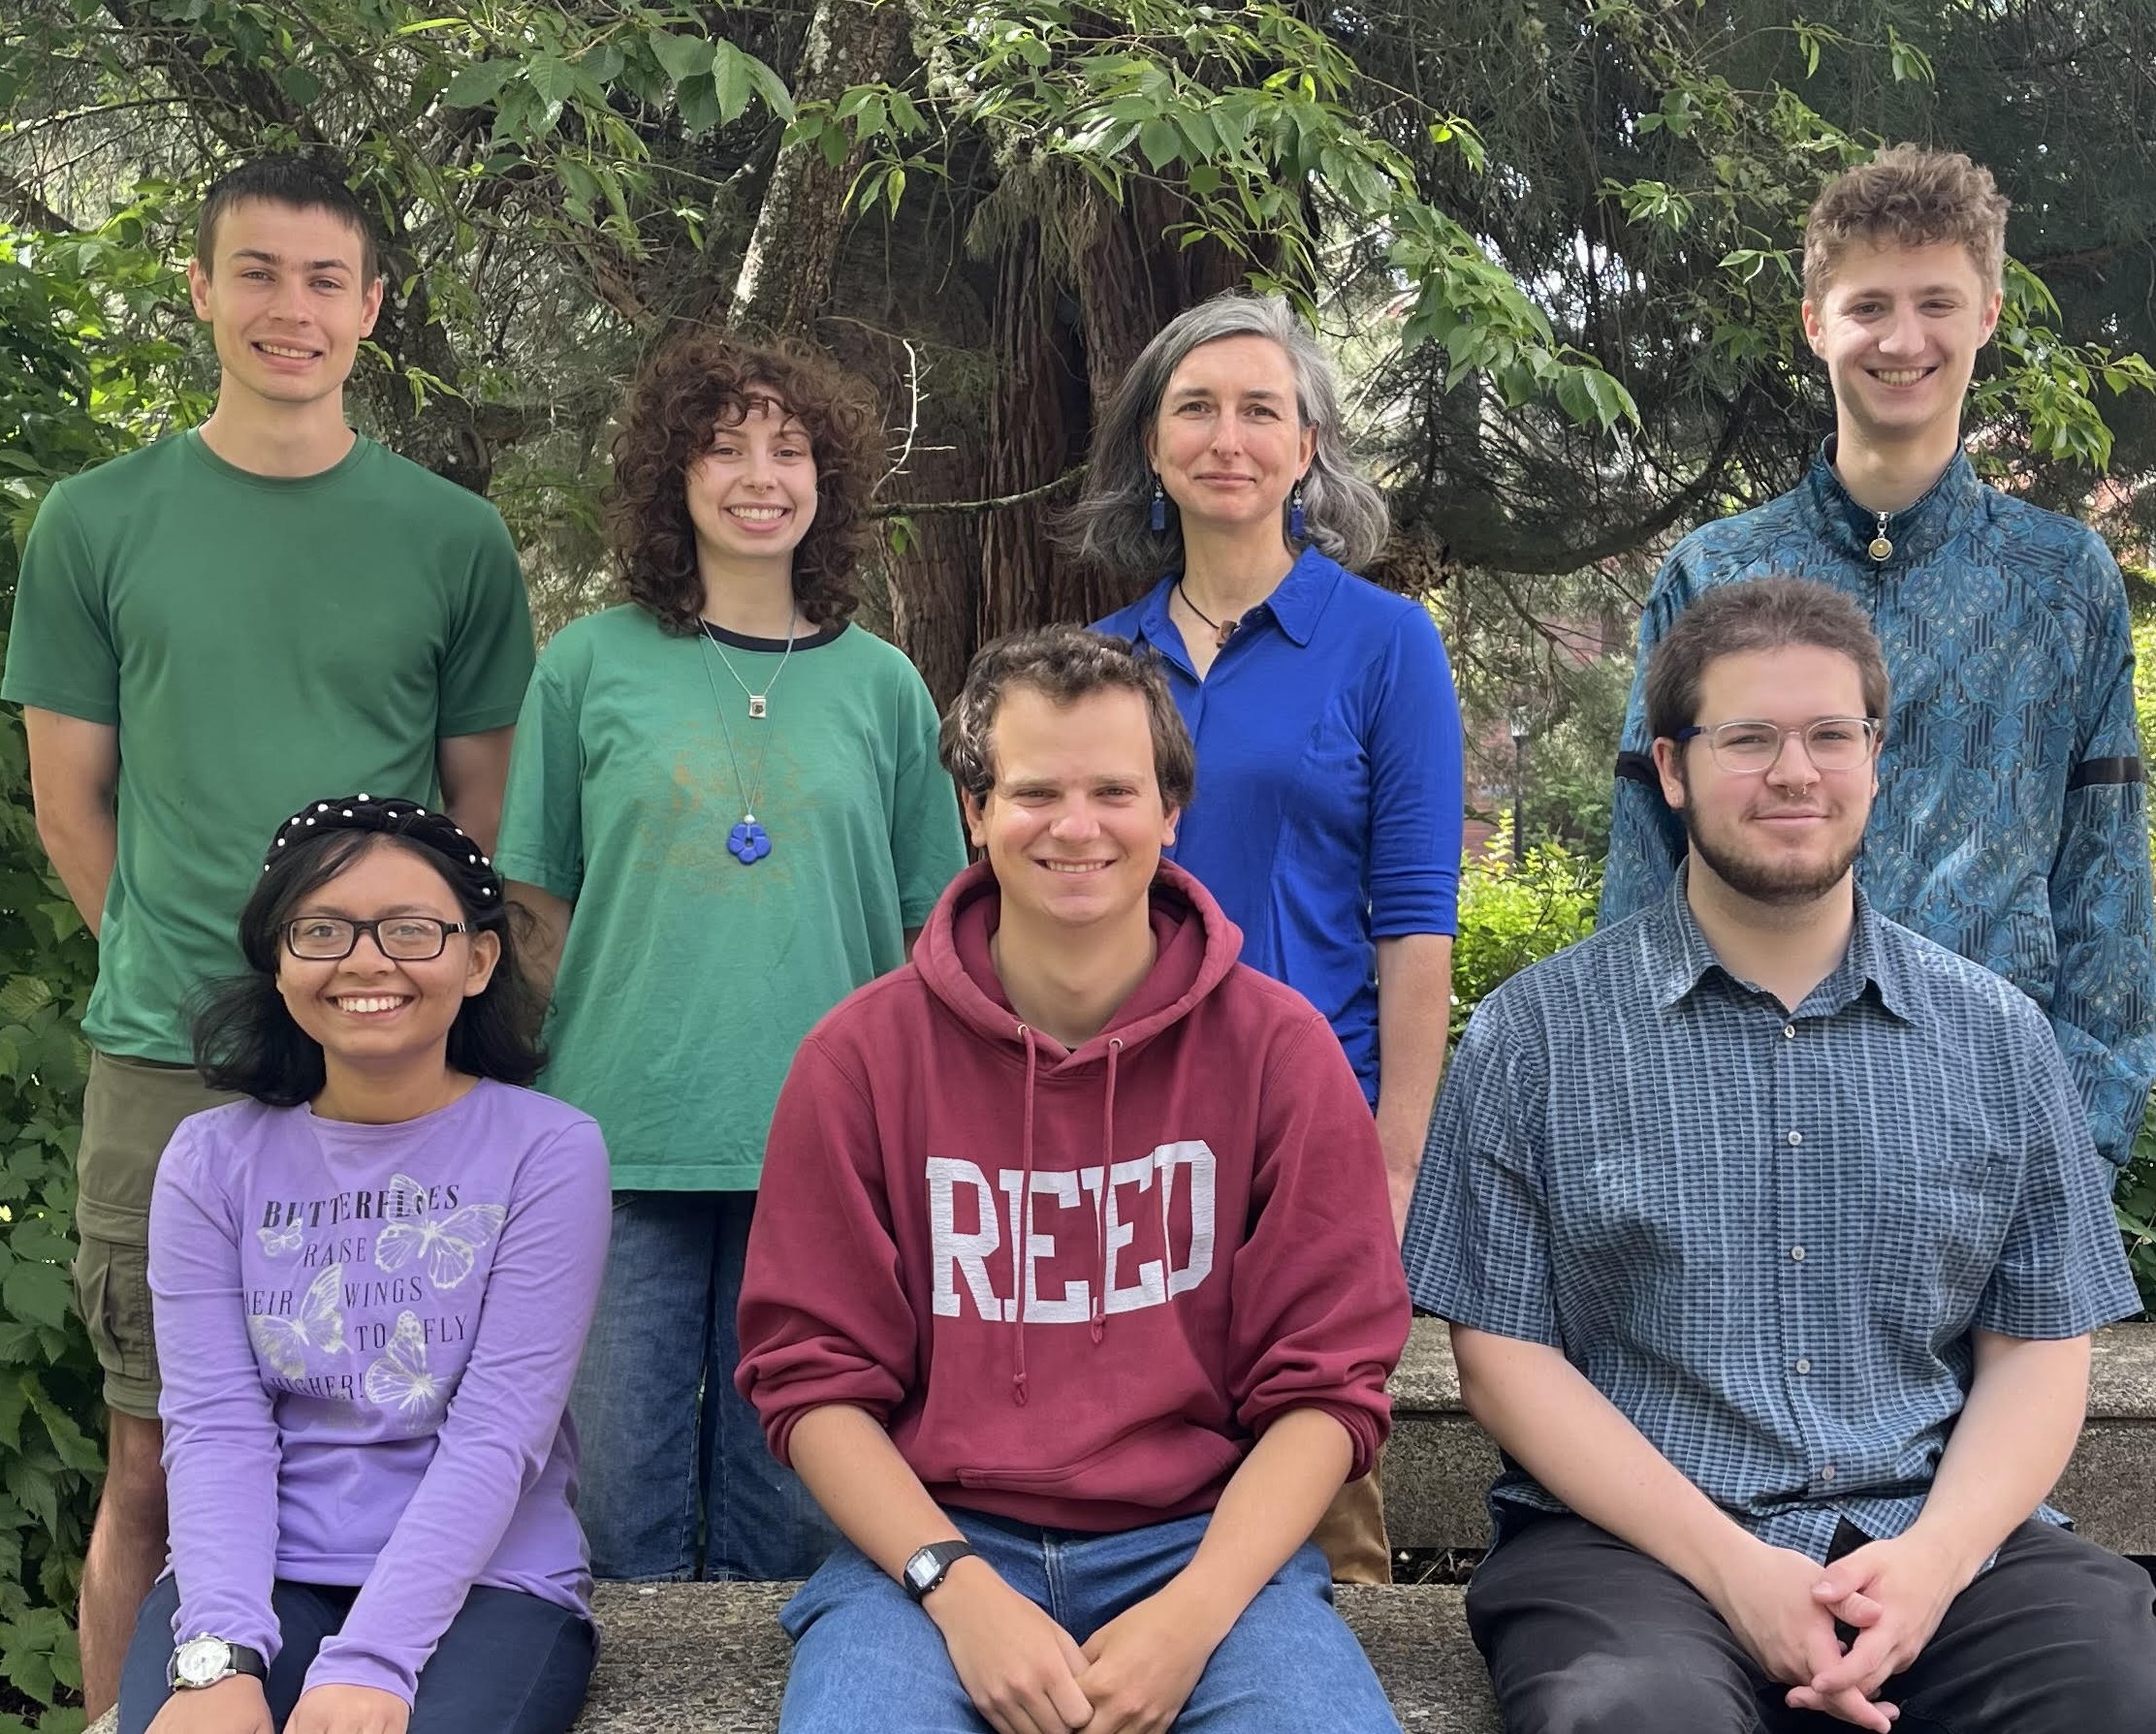 The summer research team outdoors on the Reed campus, standing behind and sitting on a bench.